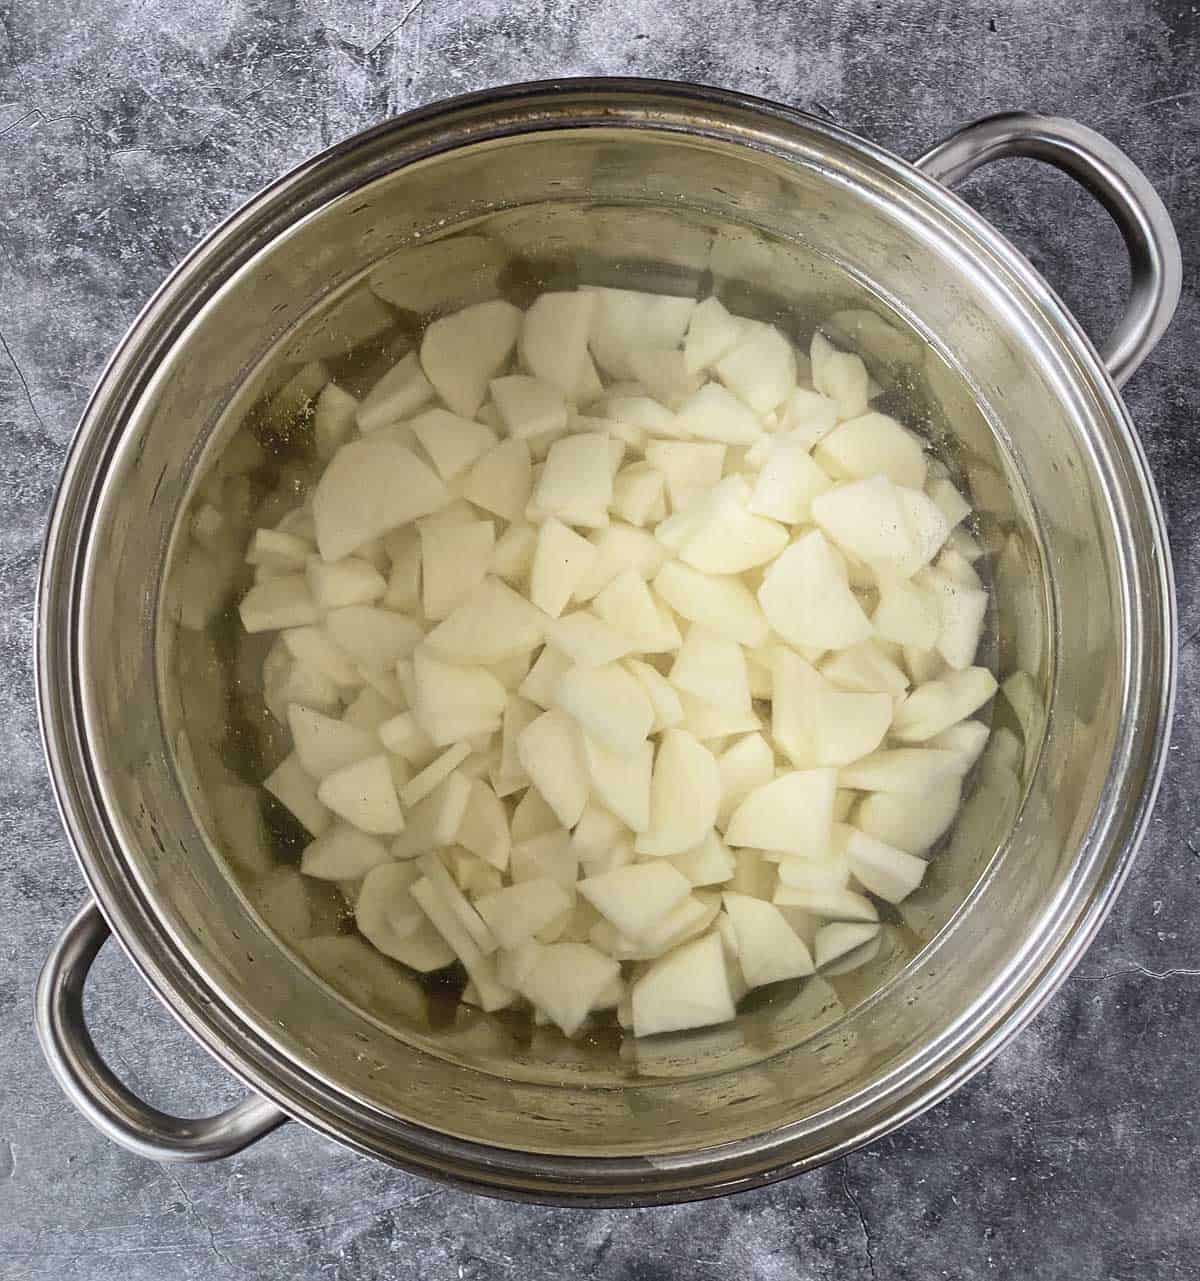 Cut potatoes in a large stainless steel pot of water.